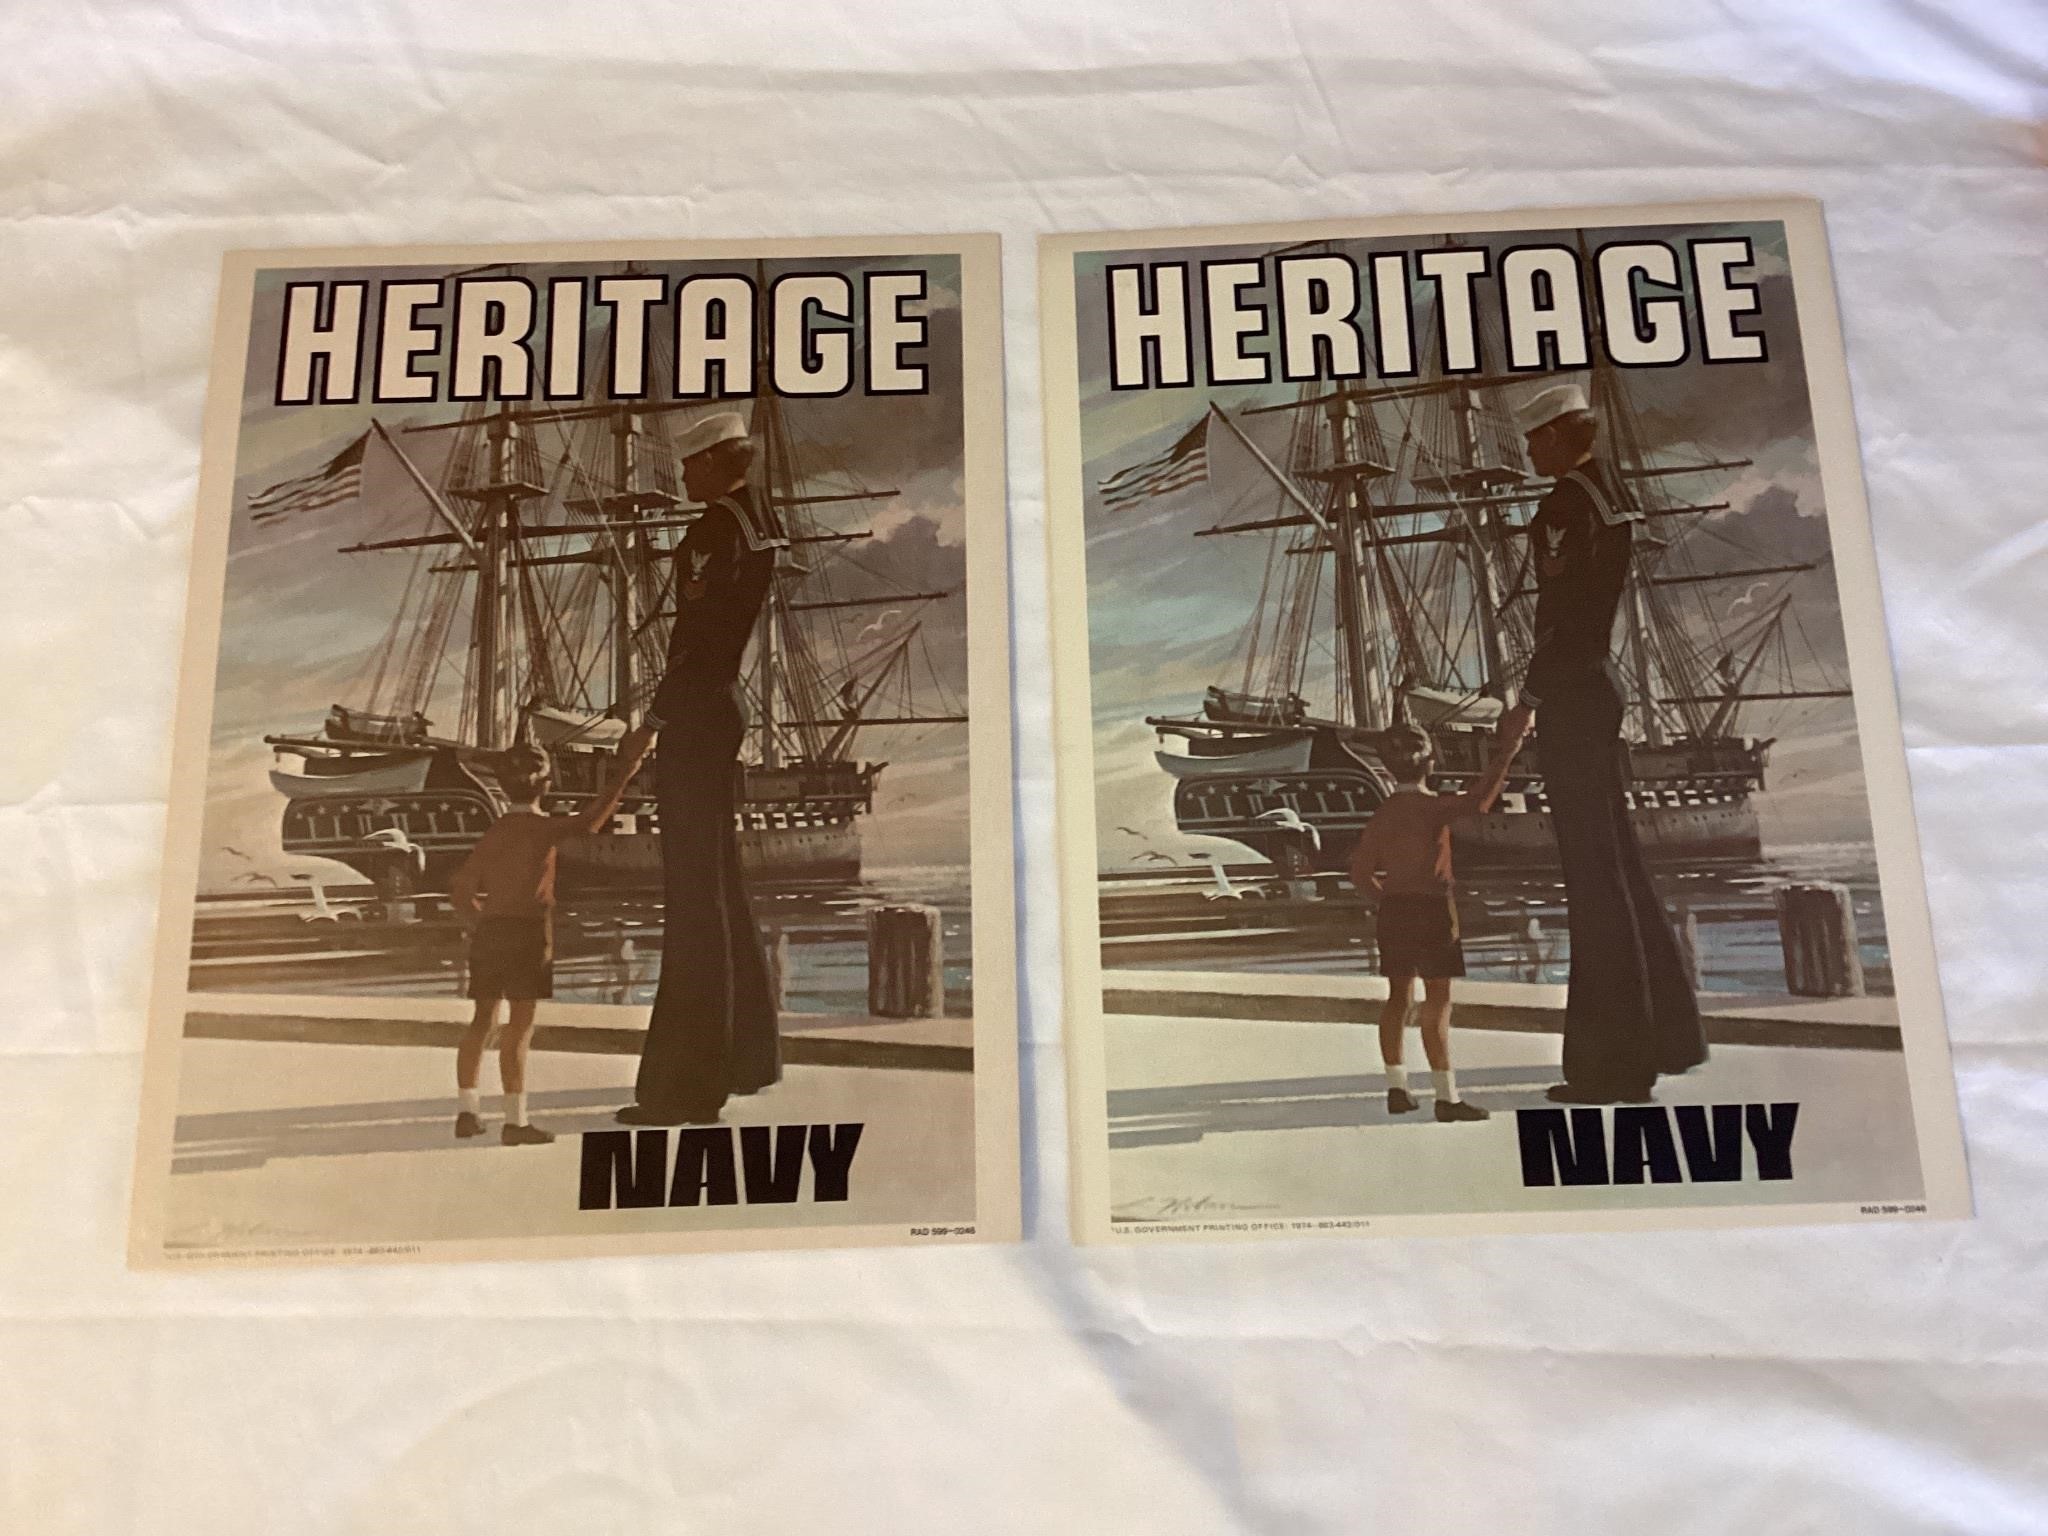 US Navy recruitment posters